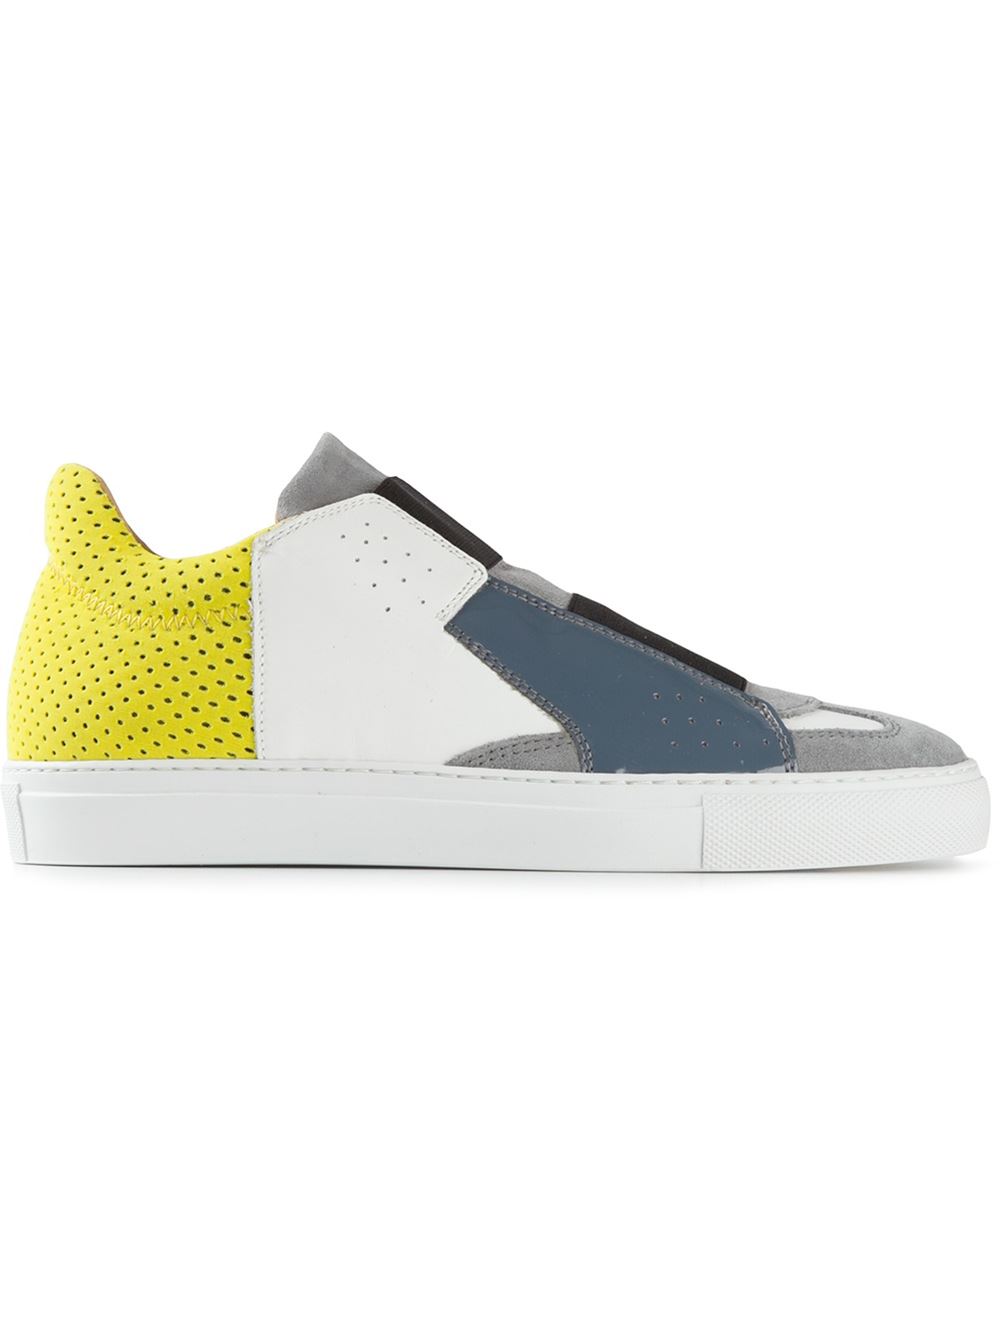 15 Stylish Sneakers For Summer